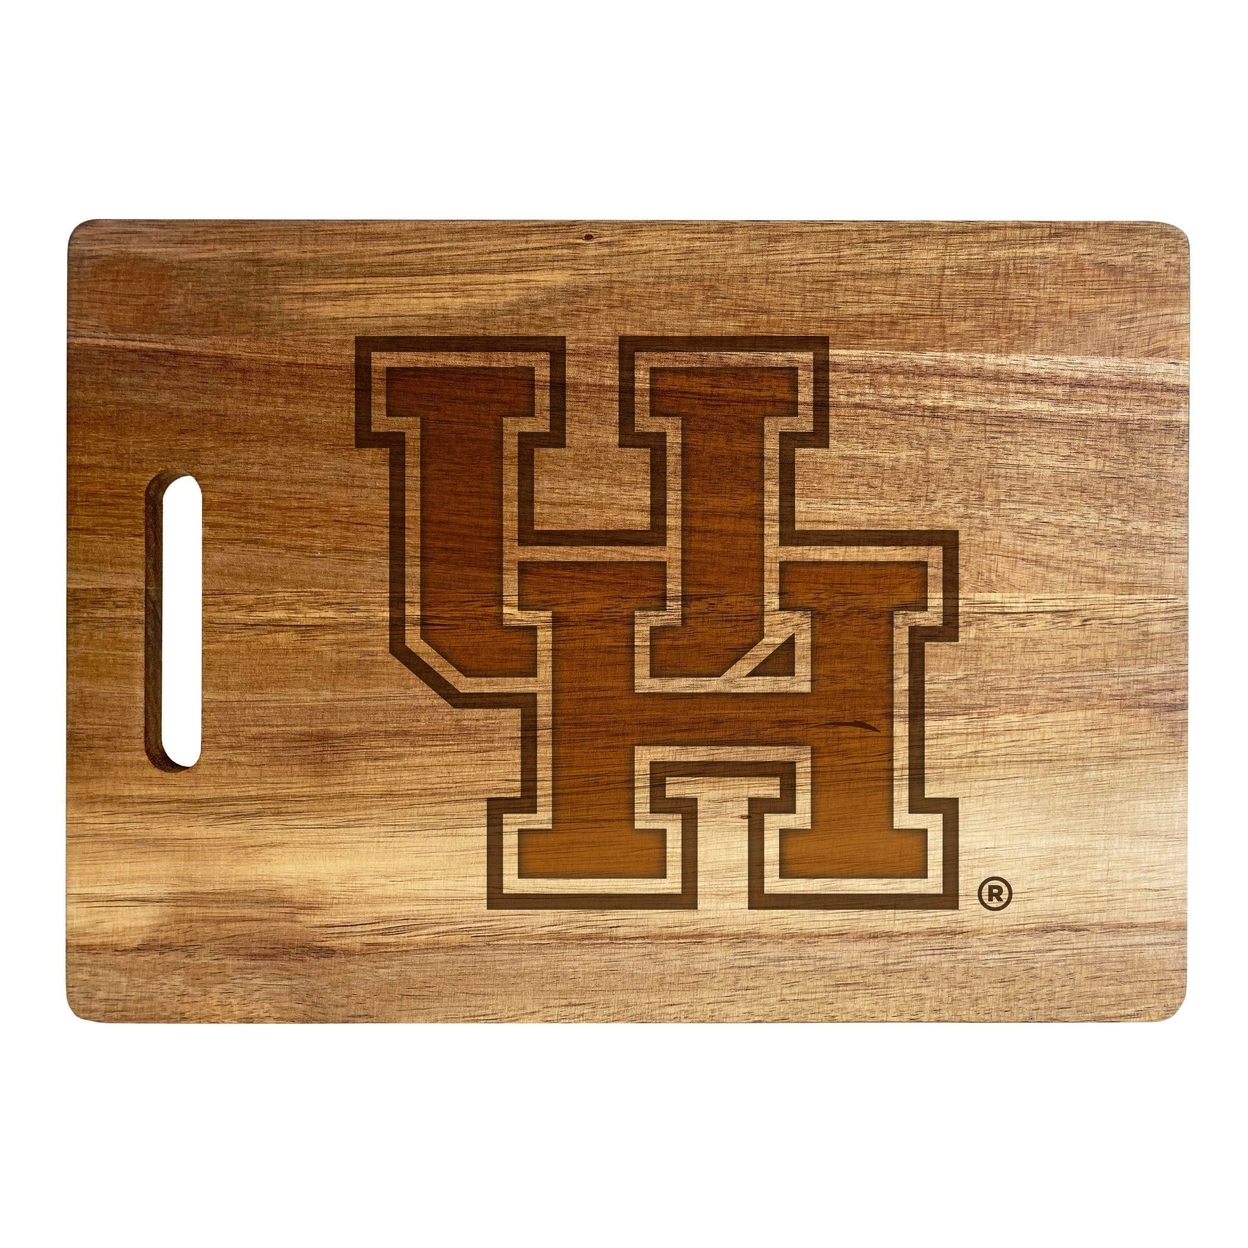 University Of Houston Engraved Wooden Cutting Board 10 X 14 Acacia Wood - Large Engraving